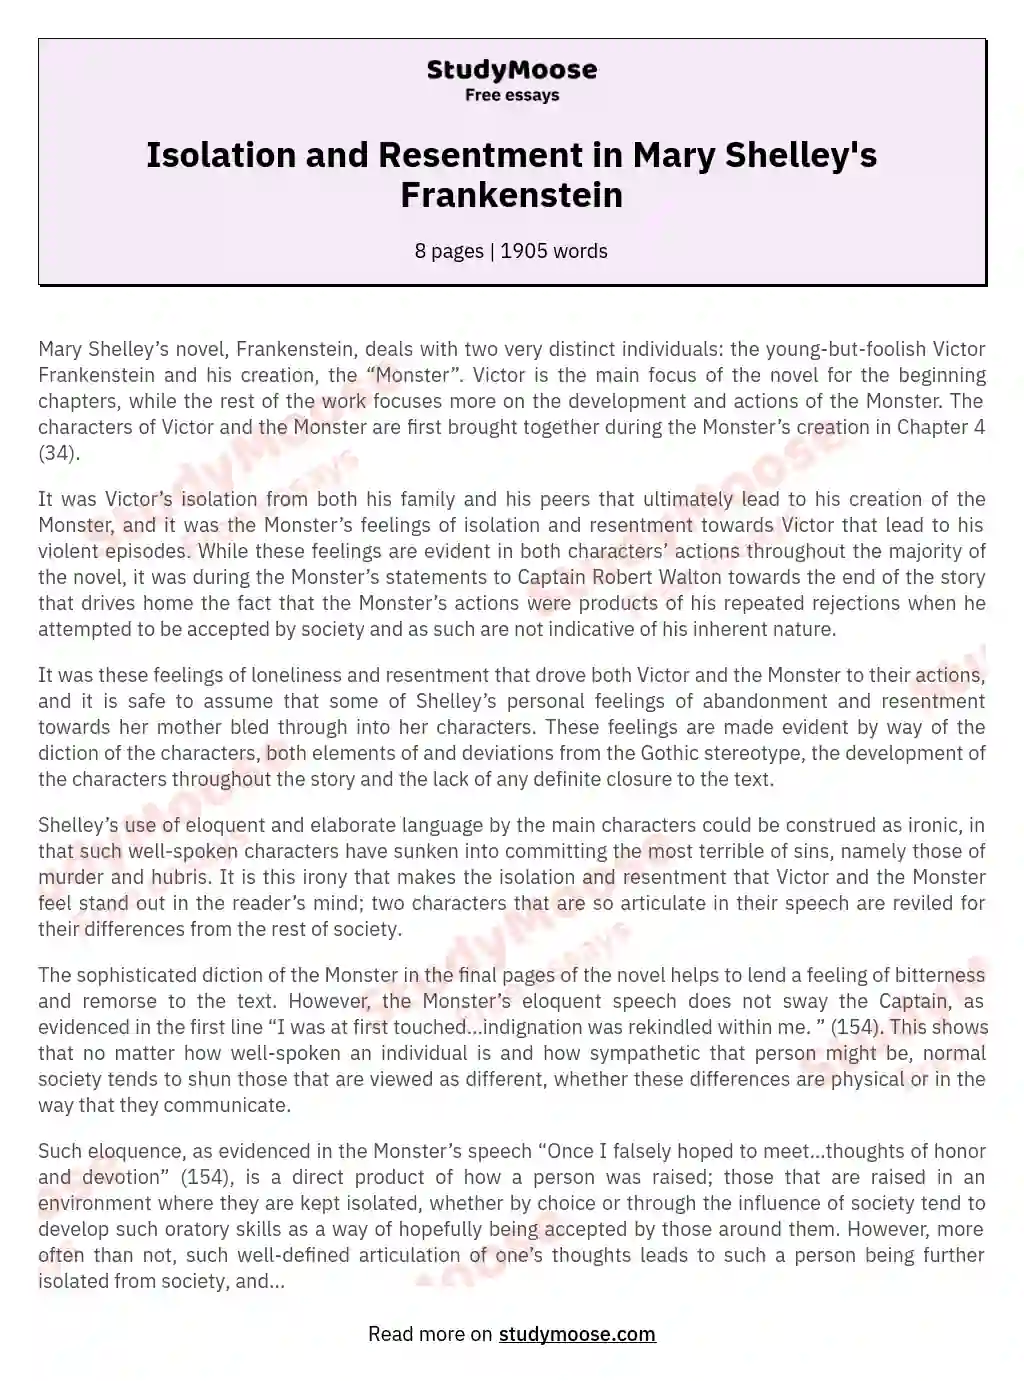 Isolation and Resentment in Mary Shelley's Frankenstein